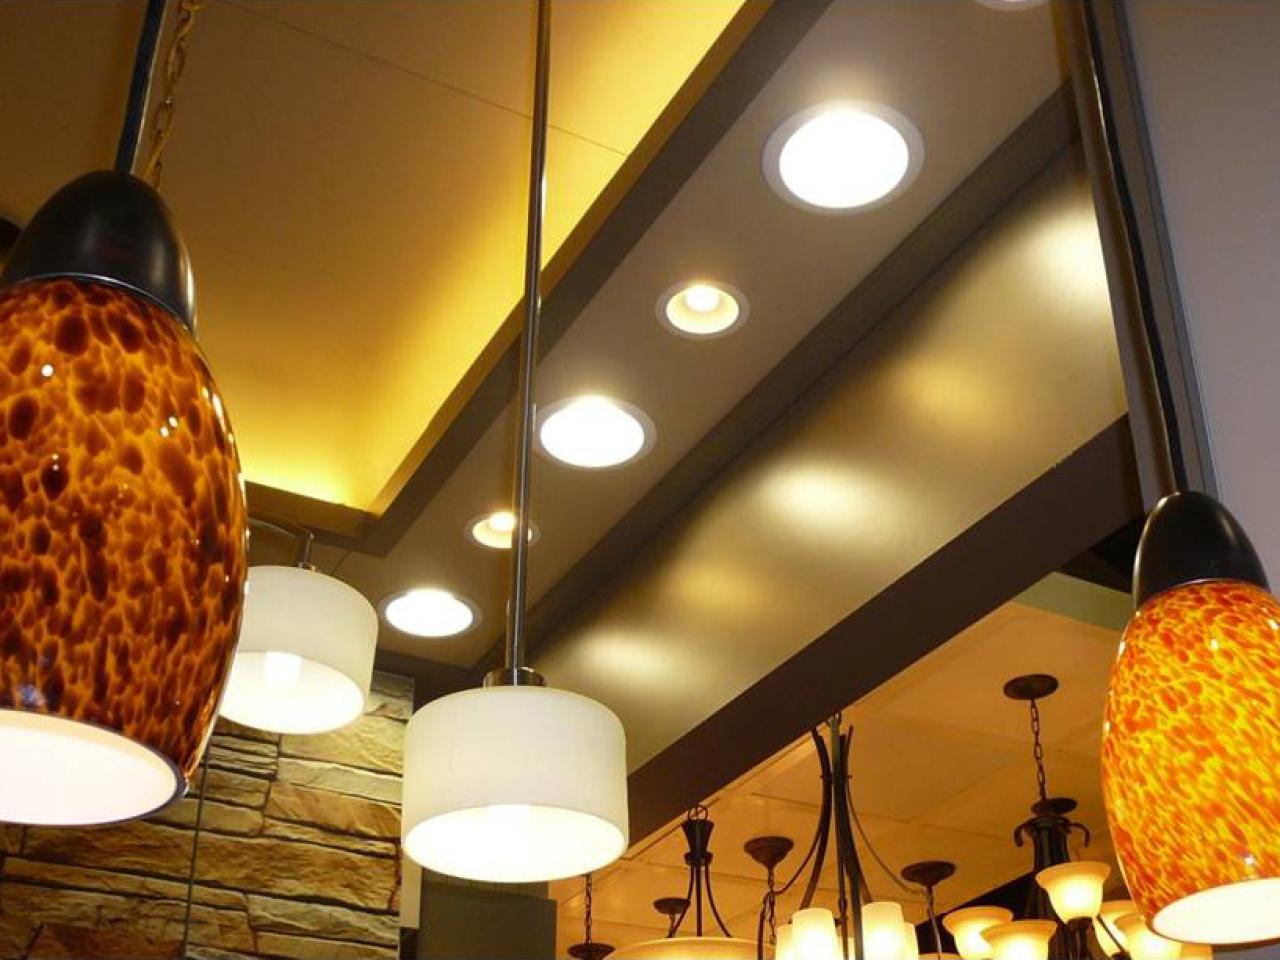 Confused Between Recessed Lighting and Ceiling Light Fixtures – Check